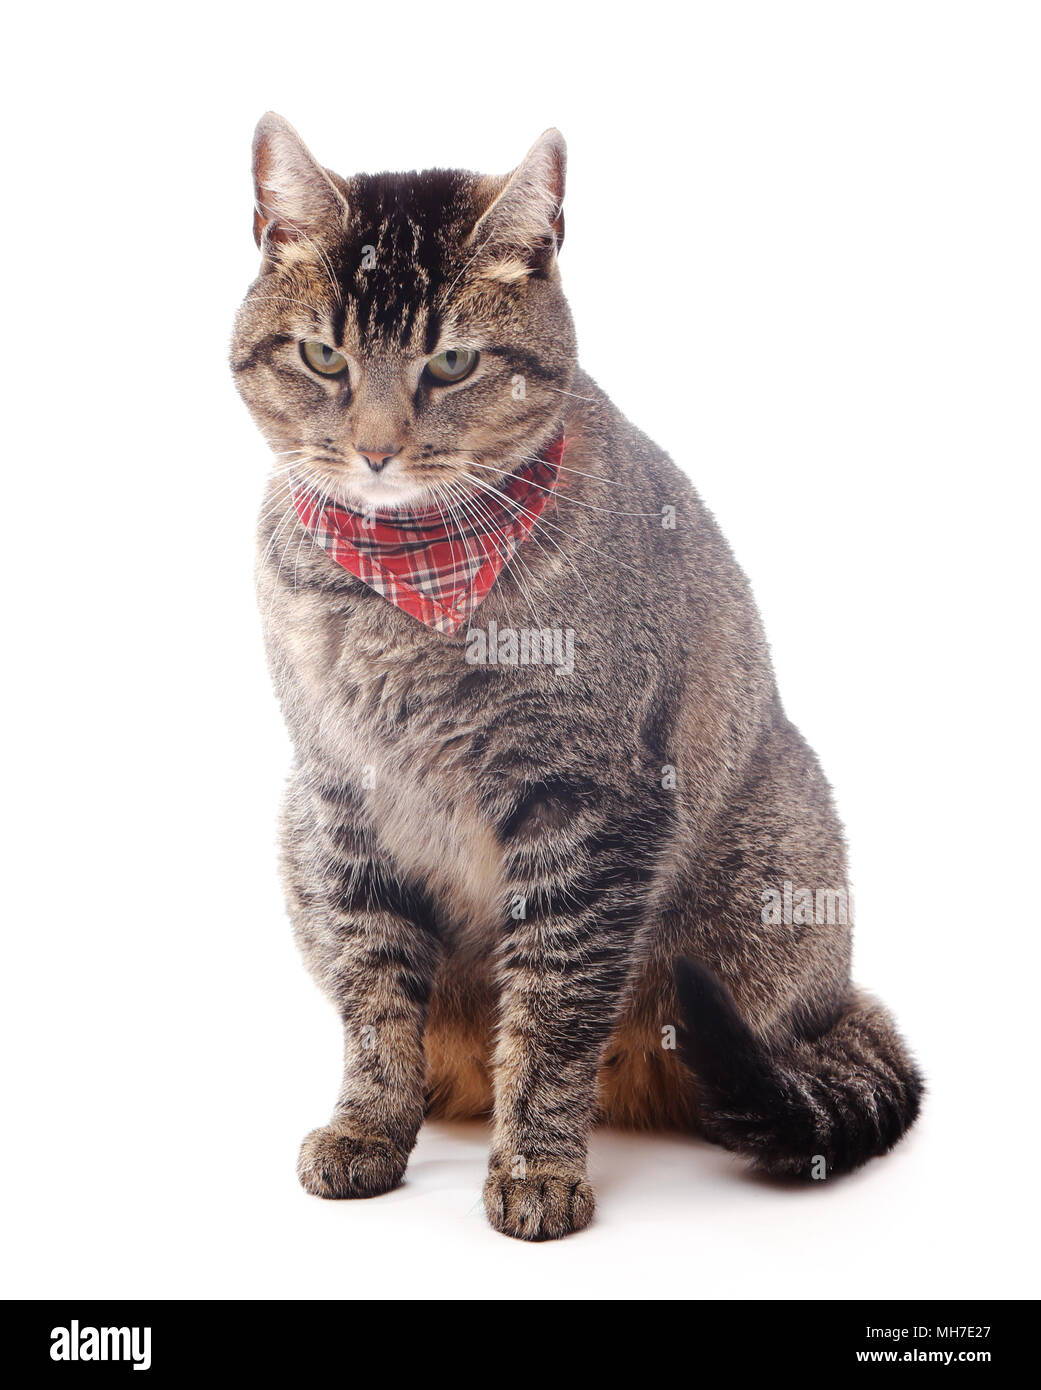 Domestic grey cat with red checkered scarf sitting isolated on white background. Stock Photo